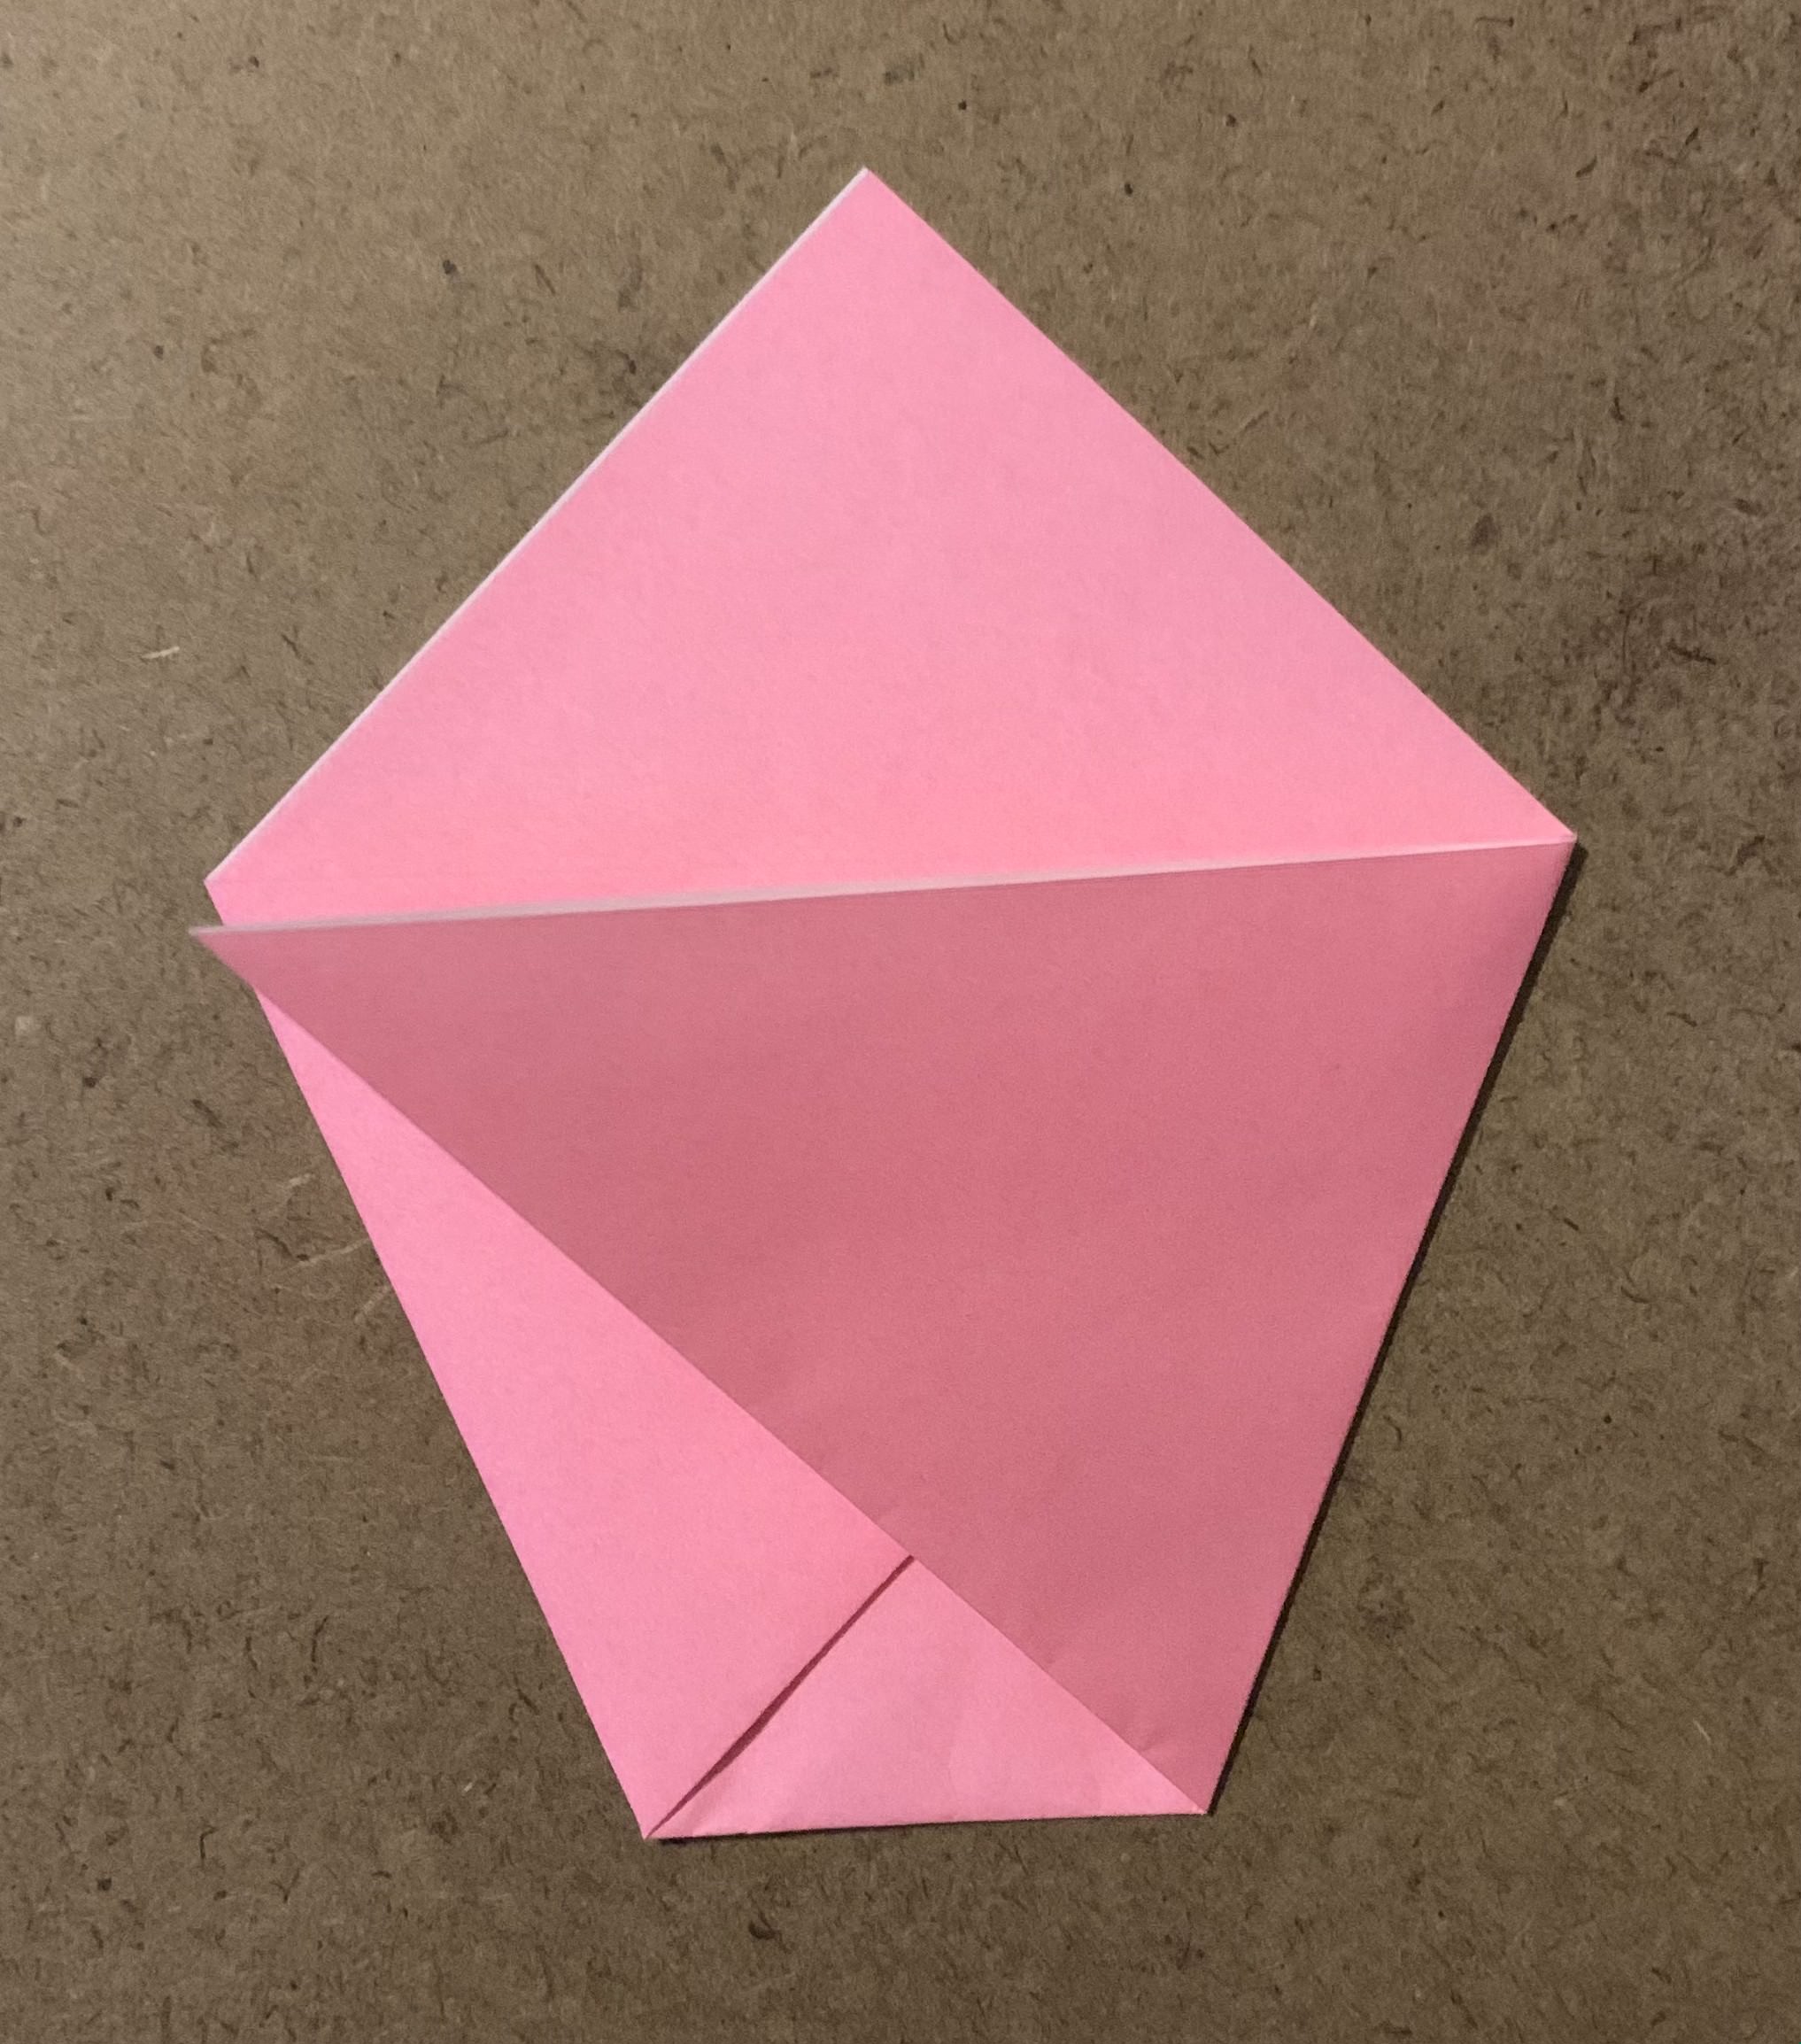 bottom right corner of triangle folded to middle left